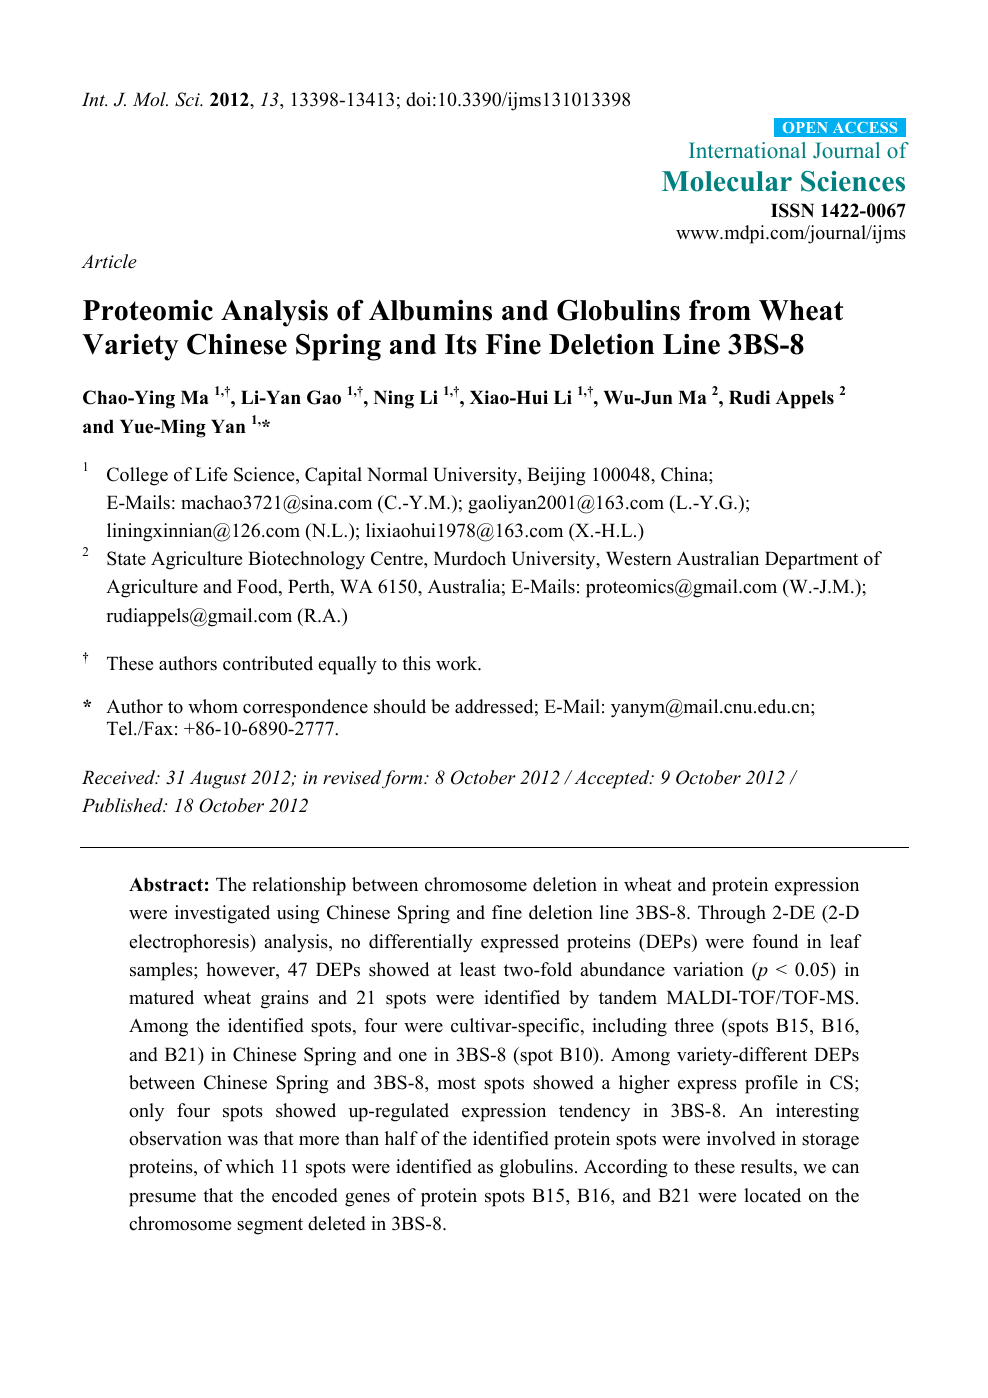 Proteomic Analysis Of Albumins And Globulins From Wheat Variety Chinese Spring And Its Fine Deletion Line 3bs 8 Topic Of Research Paper In Biological Sciences Download Scholarly Article Pdf And Read For